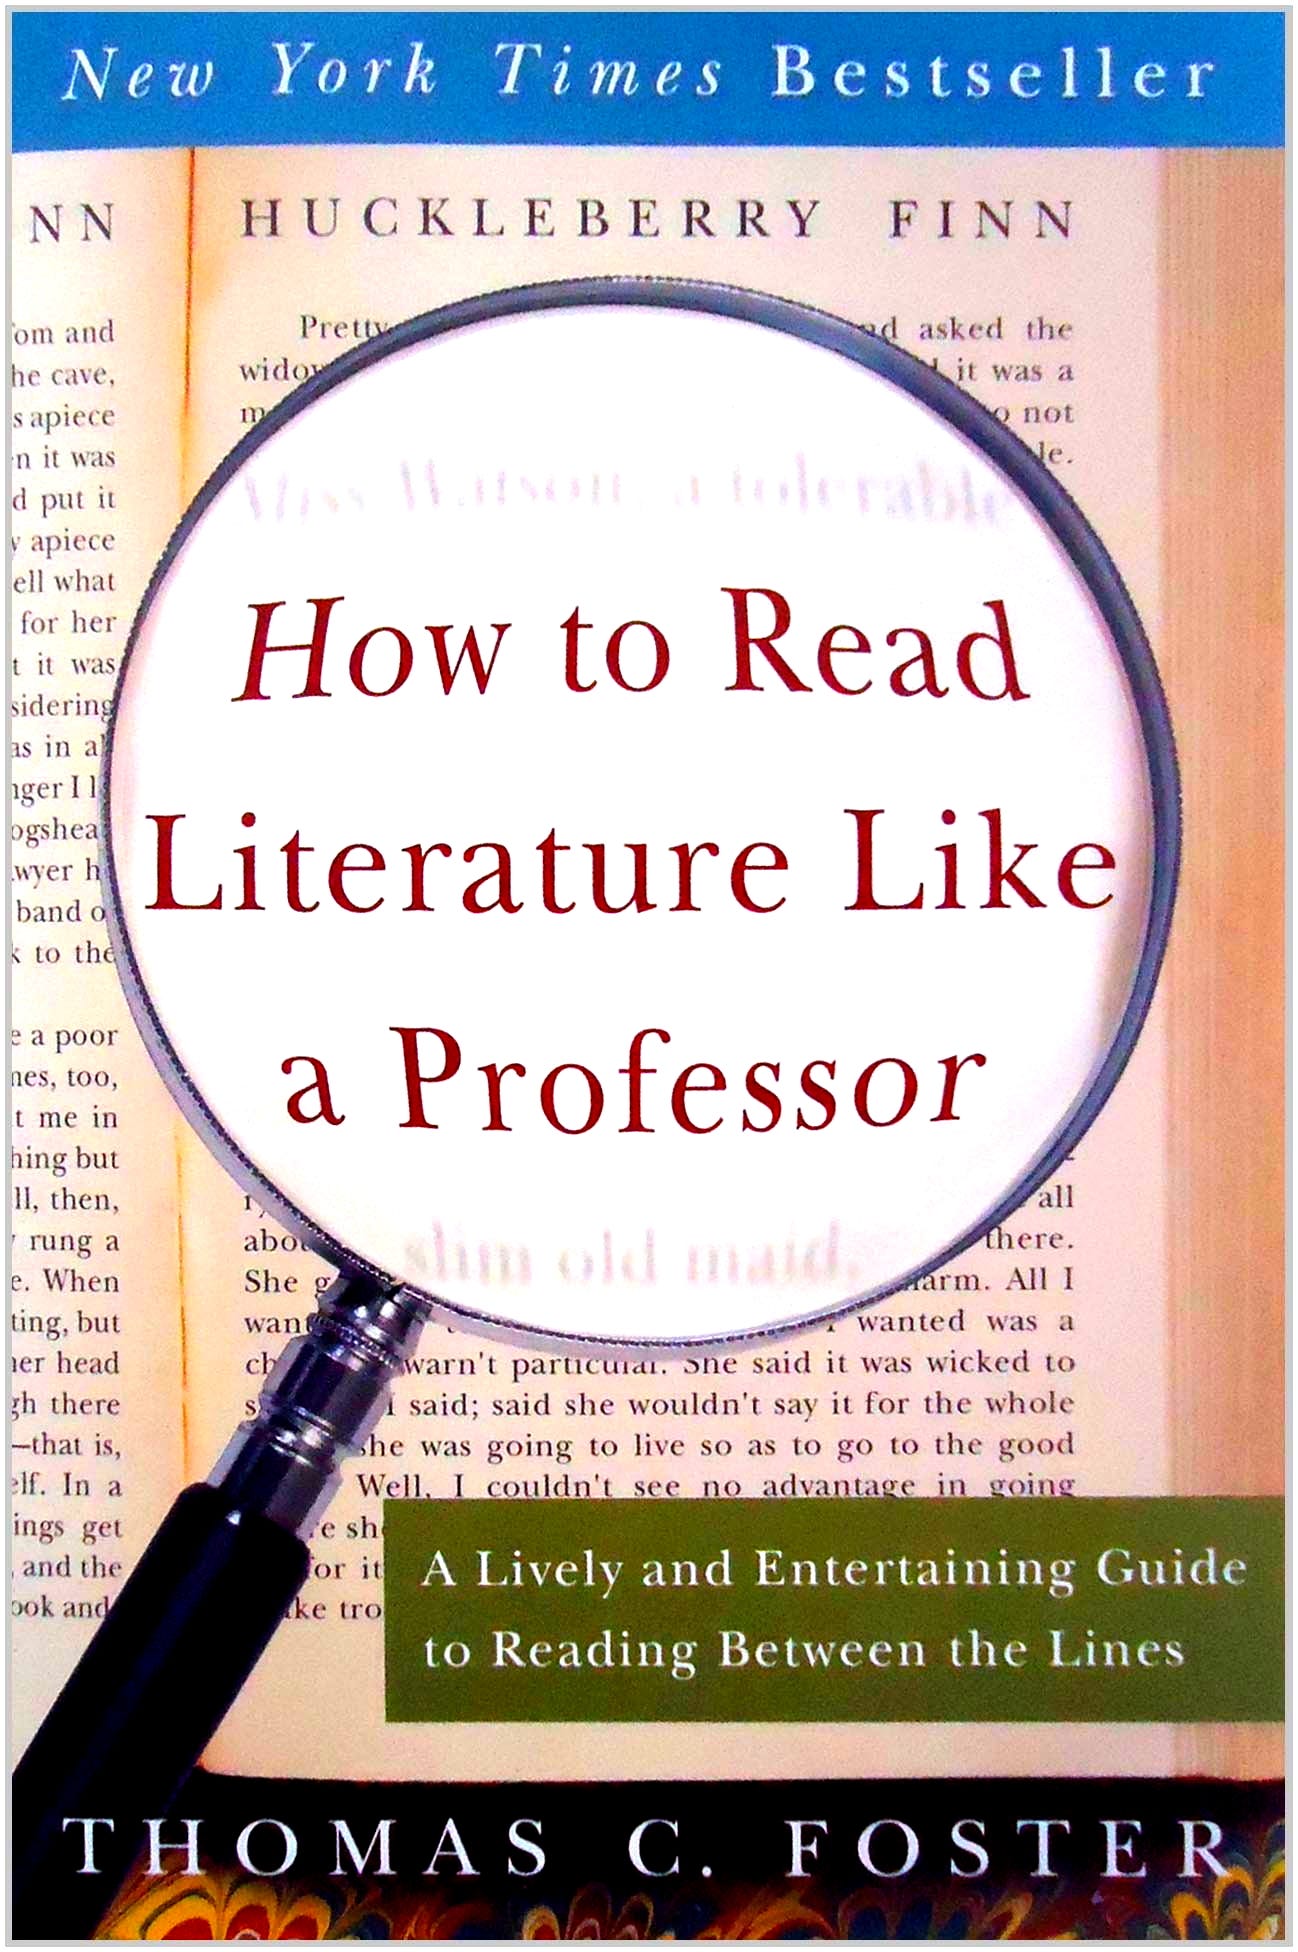 How to Read Literature like a Professor by Thomas C. Foster